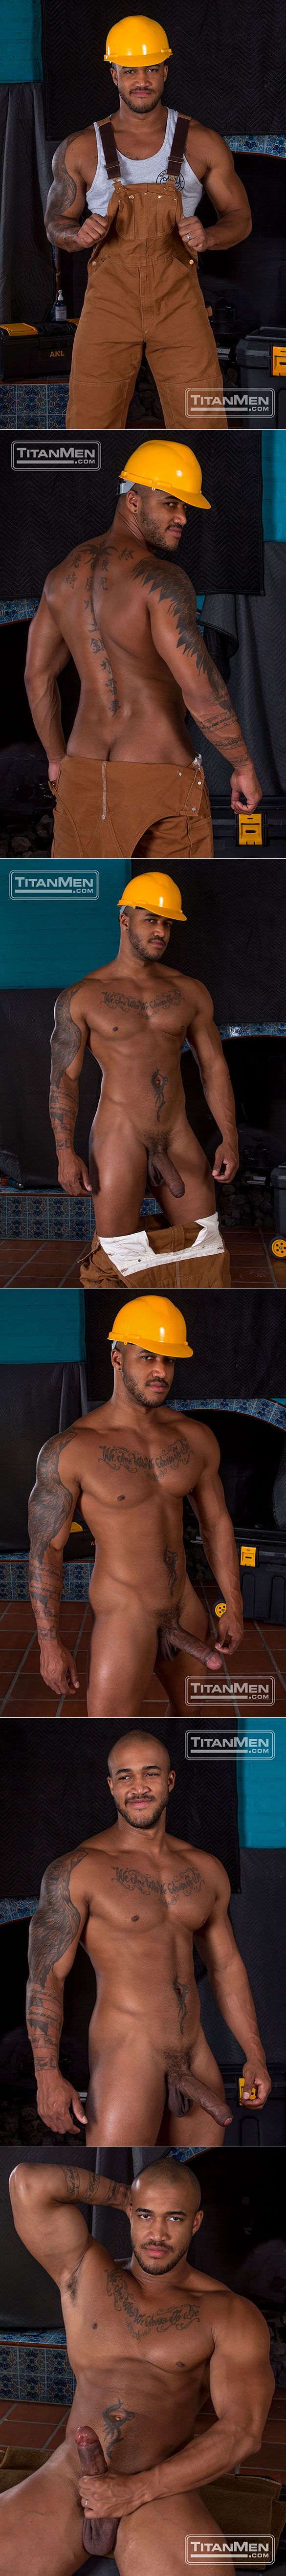 TitanMen: Eric Nero bottoms for Jason Vario and his thick cock in "Demolition"